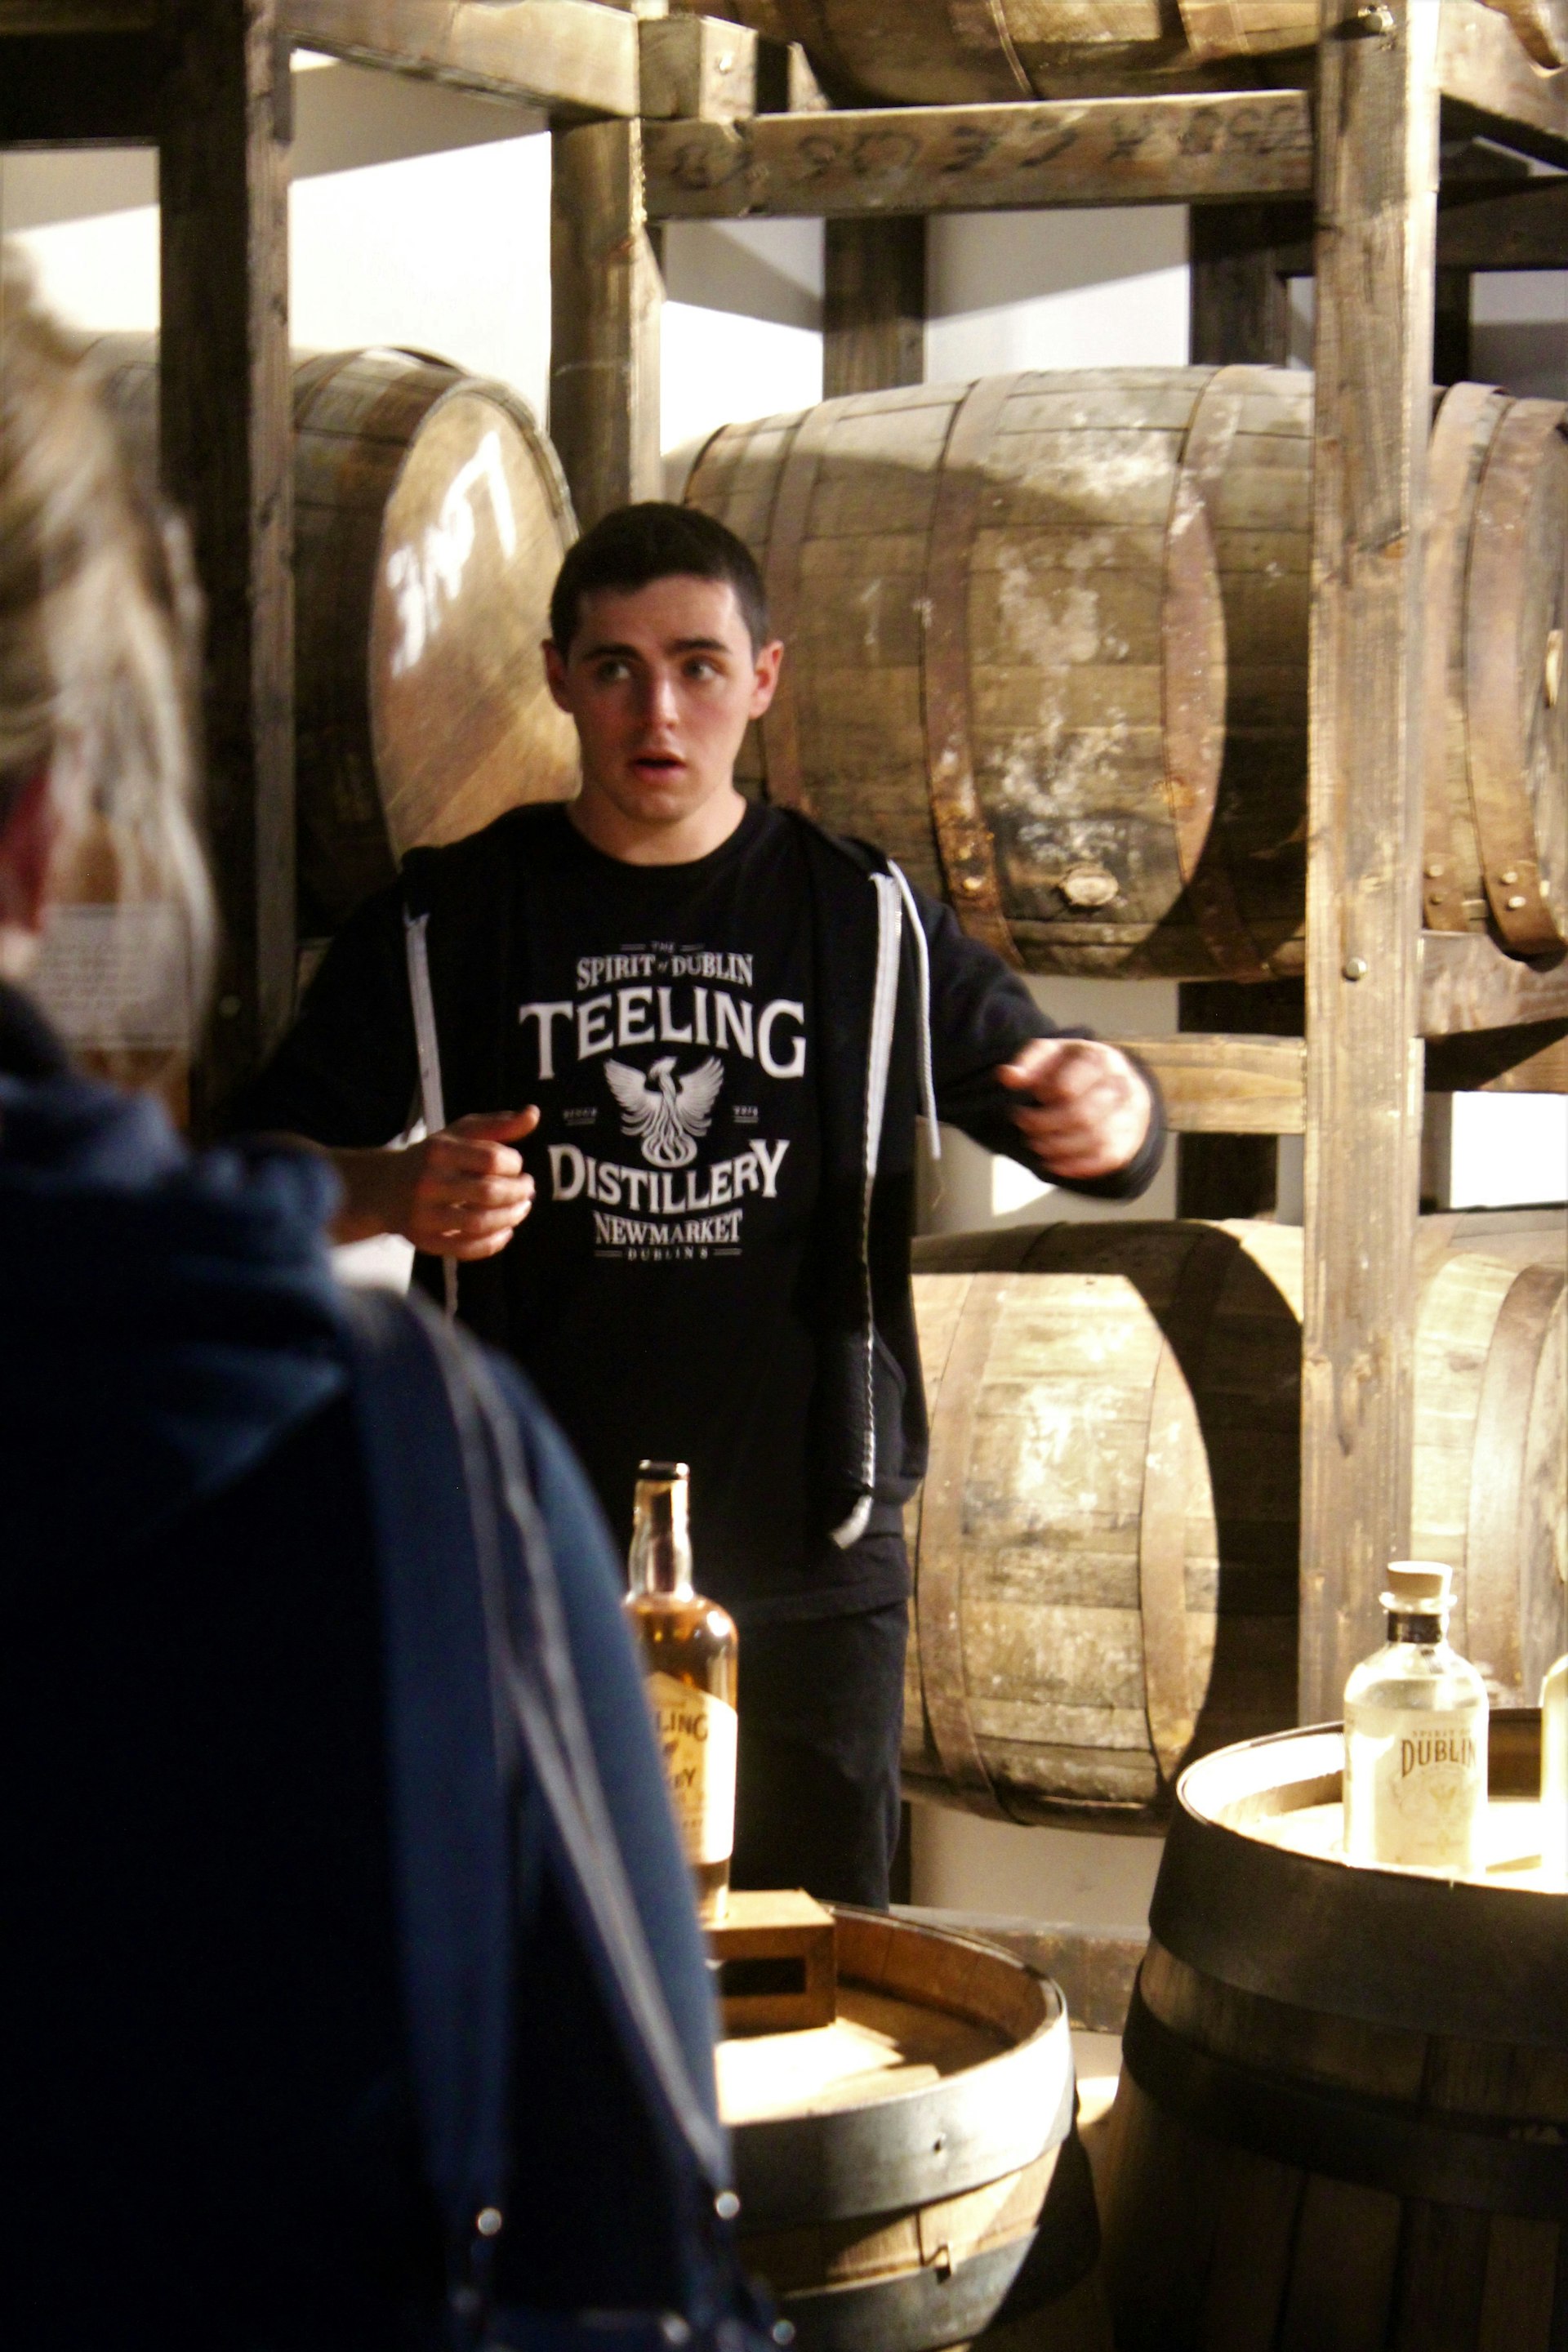 Enjoy a tour of Teelings, Dublin's first new distillery in over a century © Vic O'Sullivan / Lonely Planet